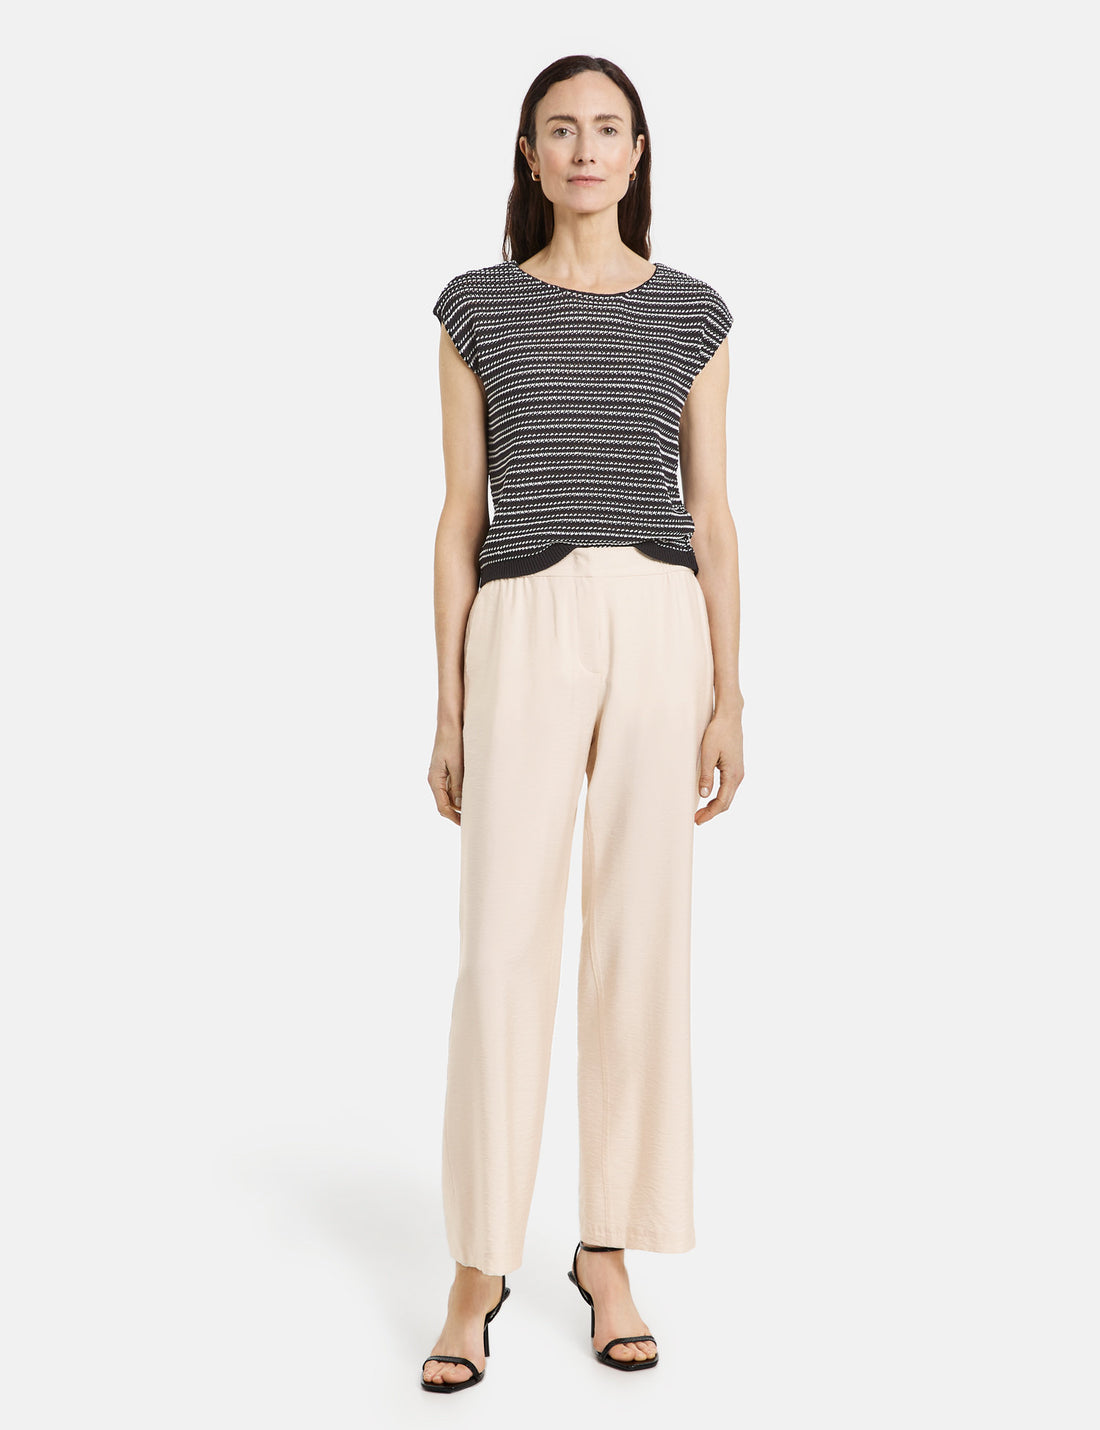 Flowing Trousers With A Stretch Waistband_320047-31354_90138_01